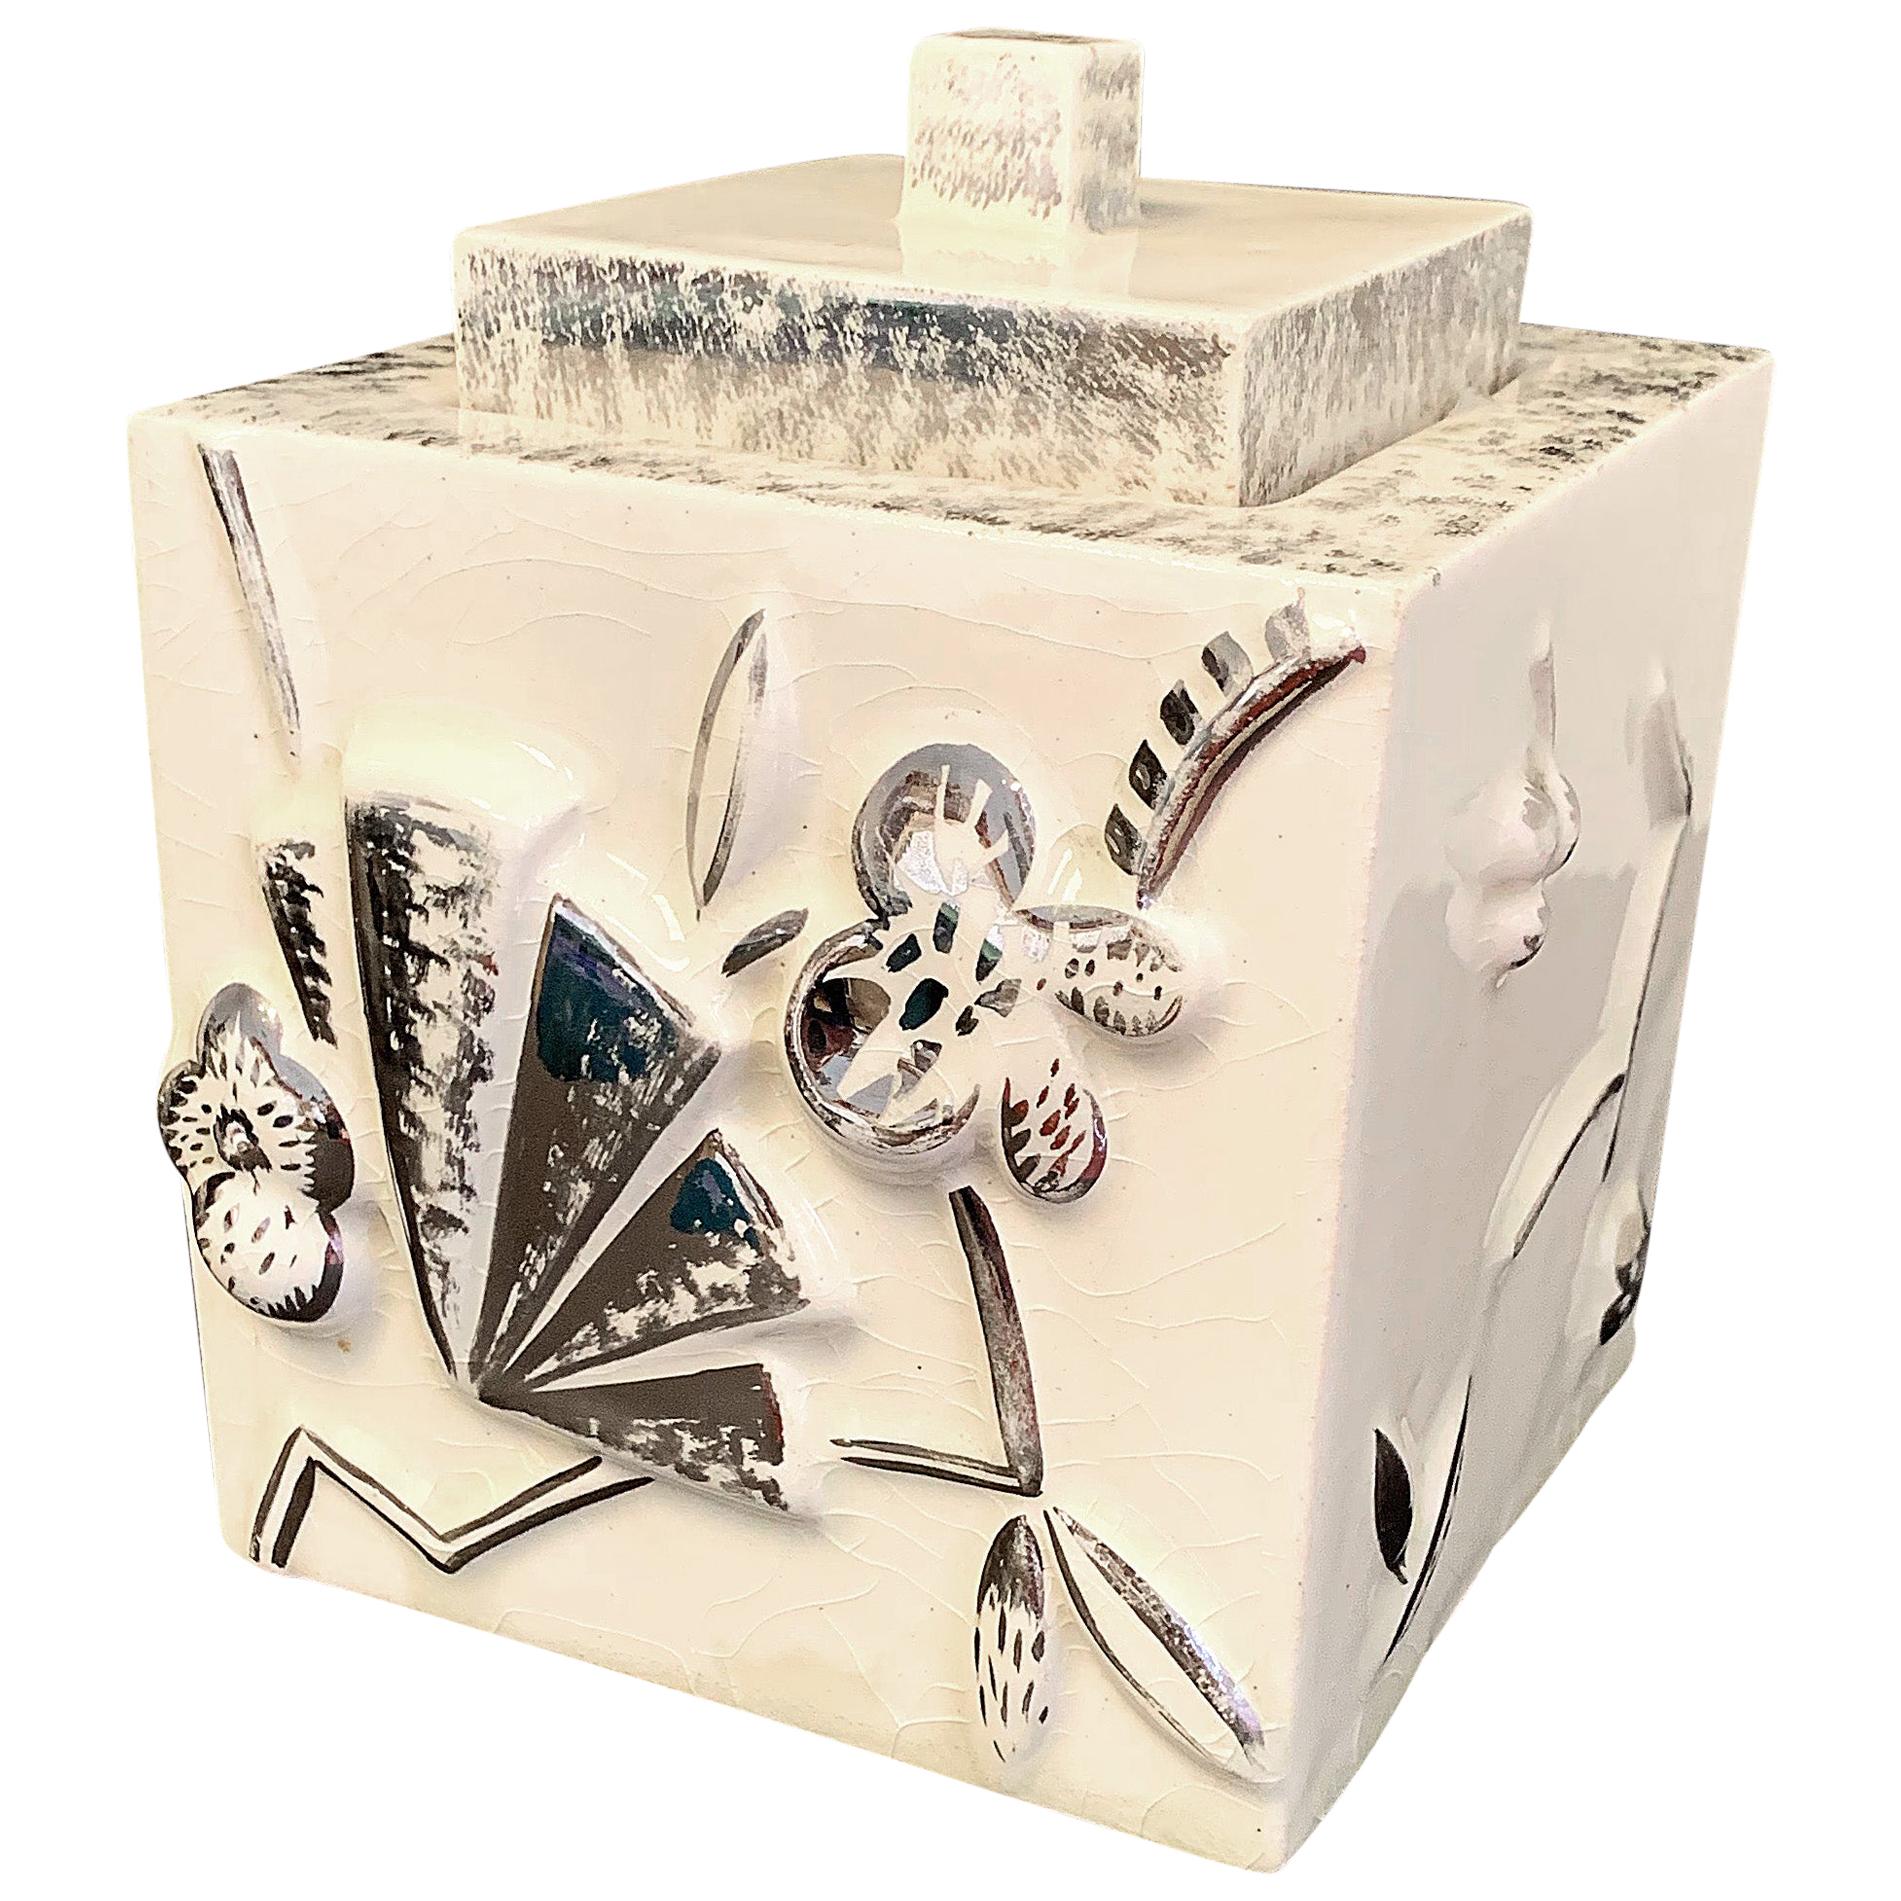 Rare Art Deco Lidded Box with Floral and Geometric Motifs, Silver and Ivory Hues